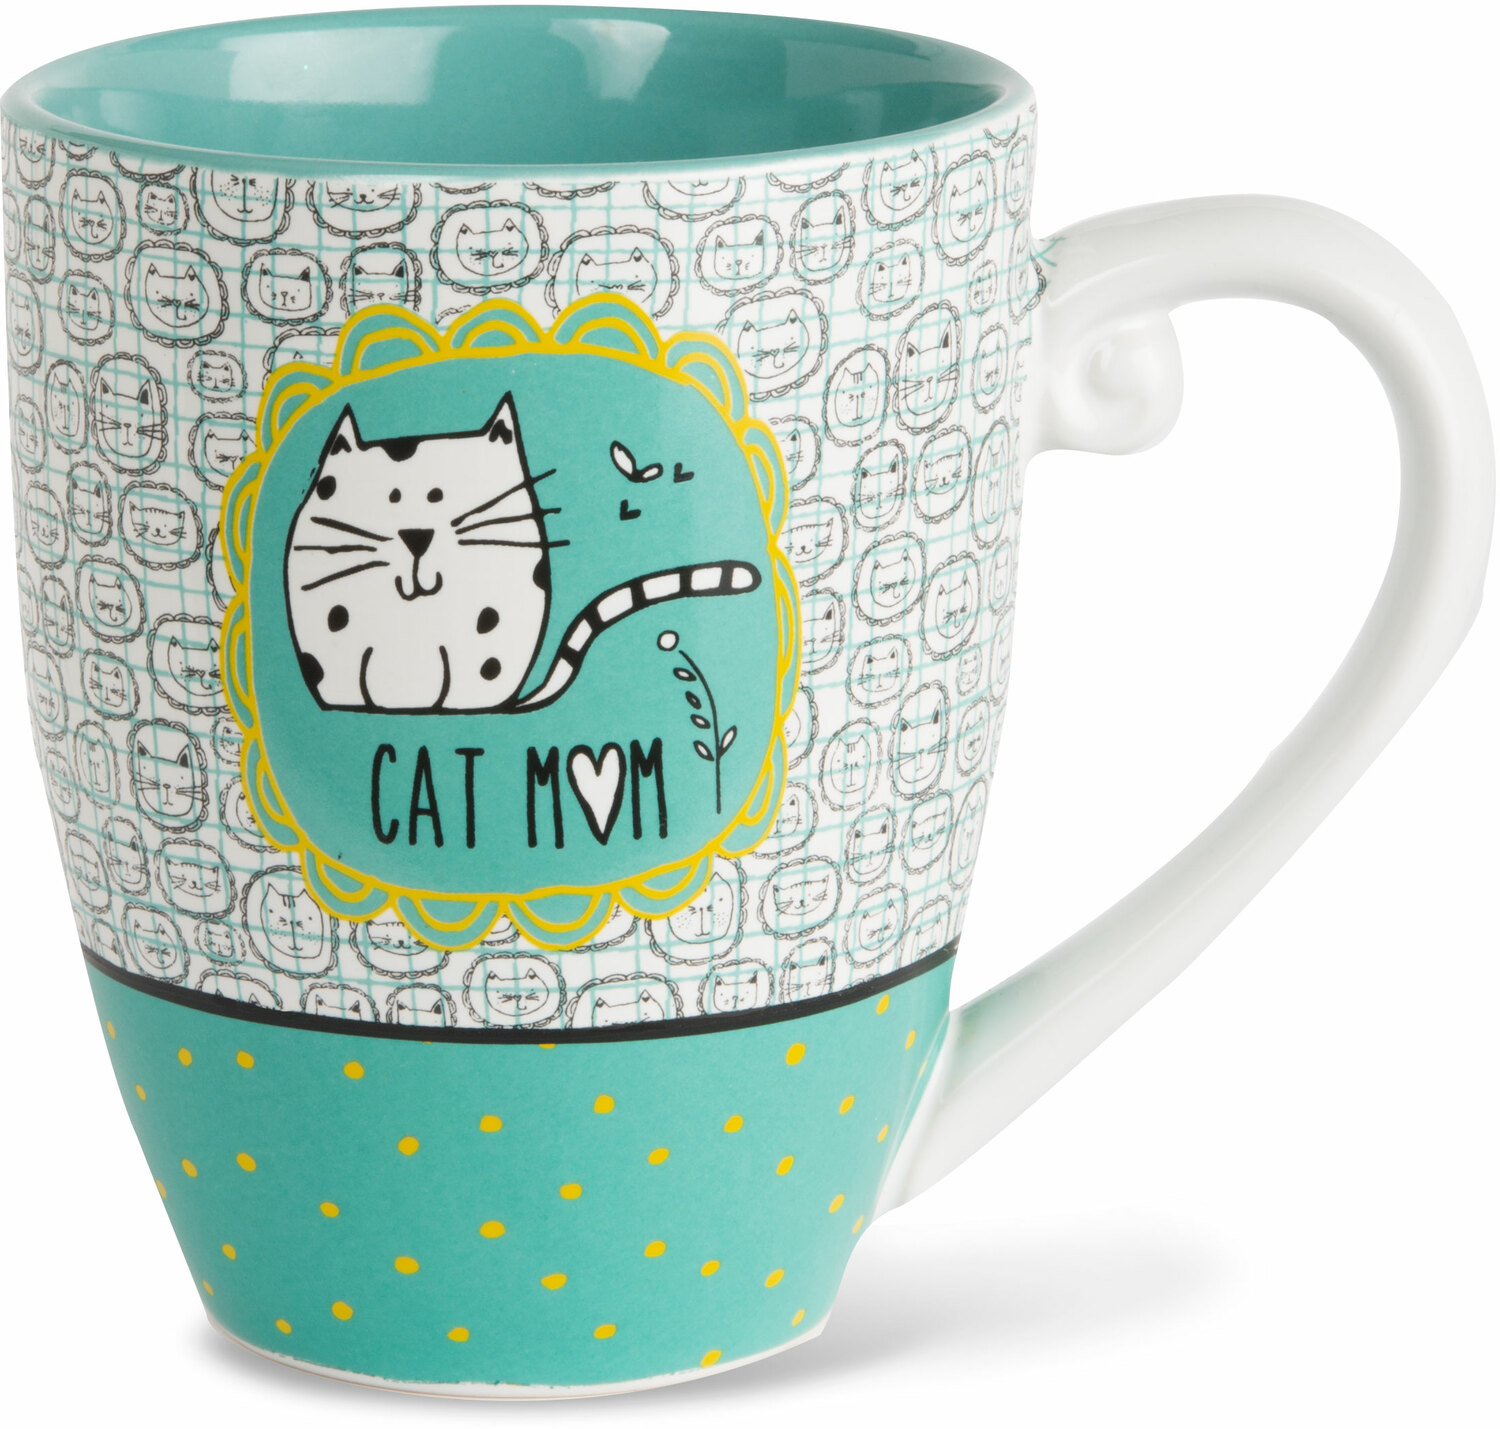 Cat Mom by It's Cats and Dogs - Cat Mom - 20 oz Cup